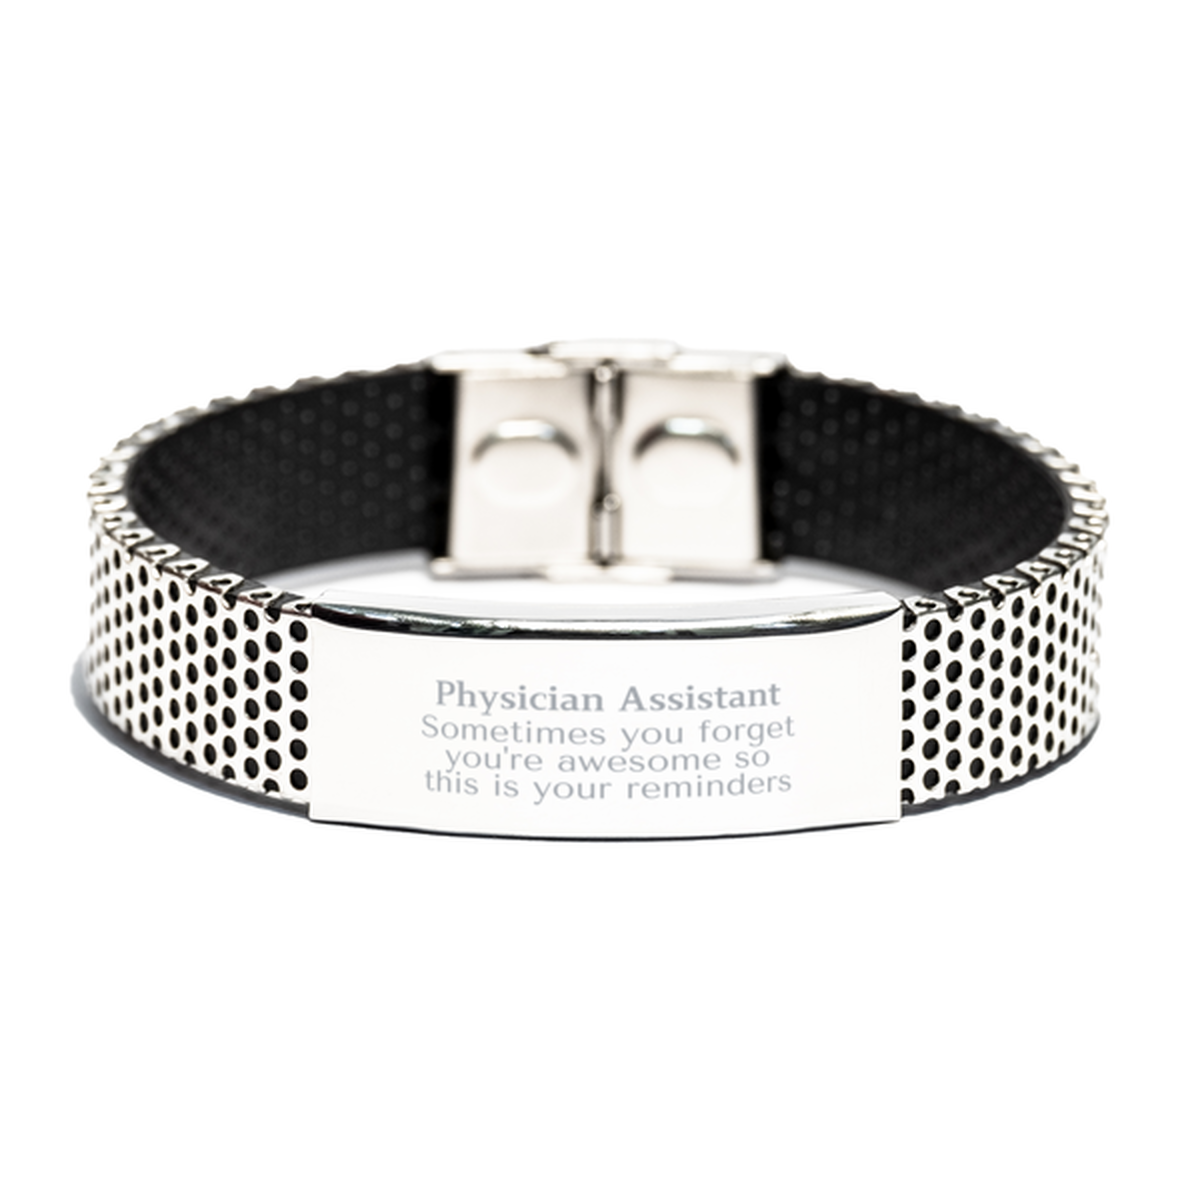 Sentimental Physician Assistant Stainless Steel Bracelet, Physician Assistant Sometimes you forget you're awesome so this is your reminders, Graduation Christmas Birthday Gifts for Physician Assistant, Men, Women, Coworkers